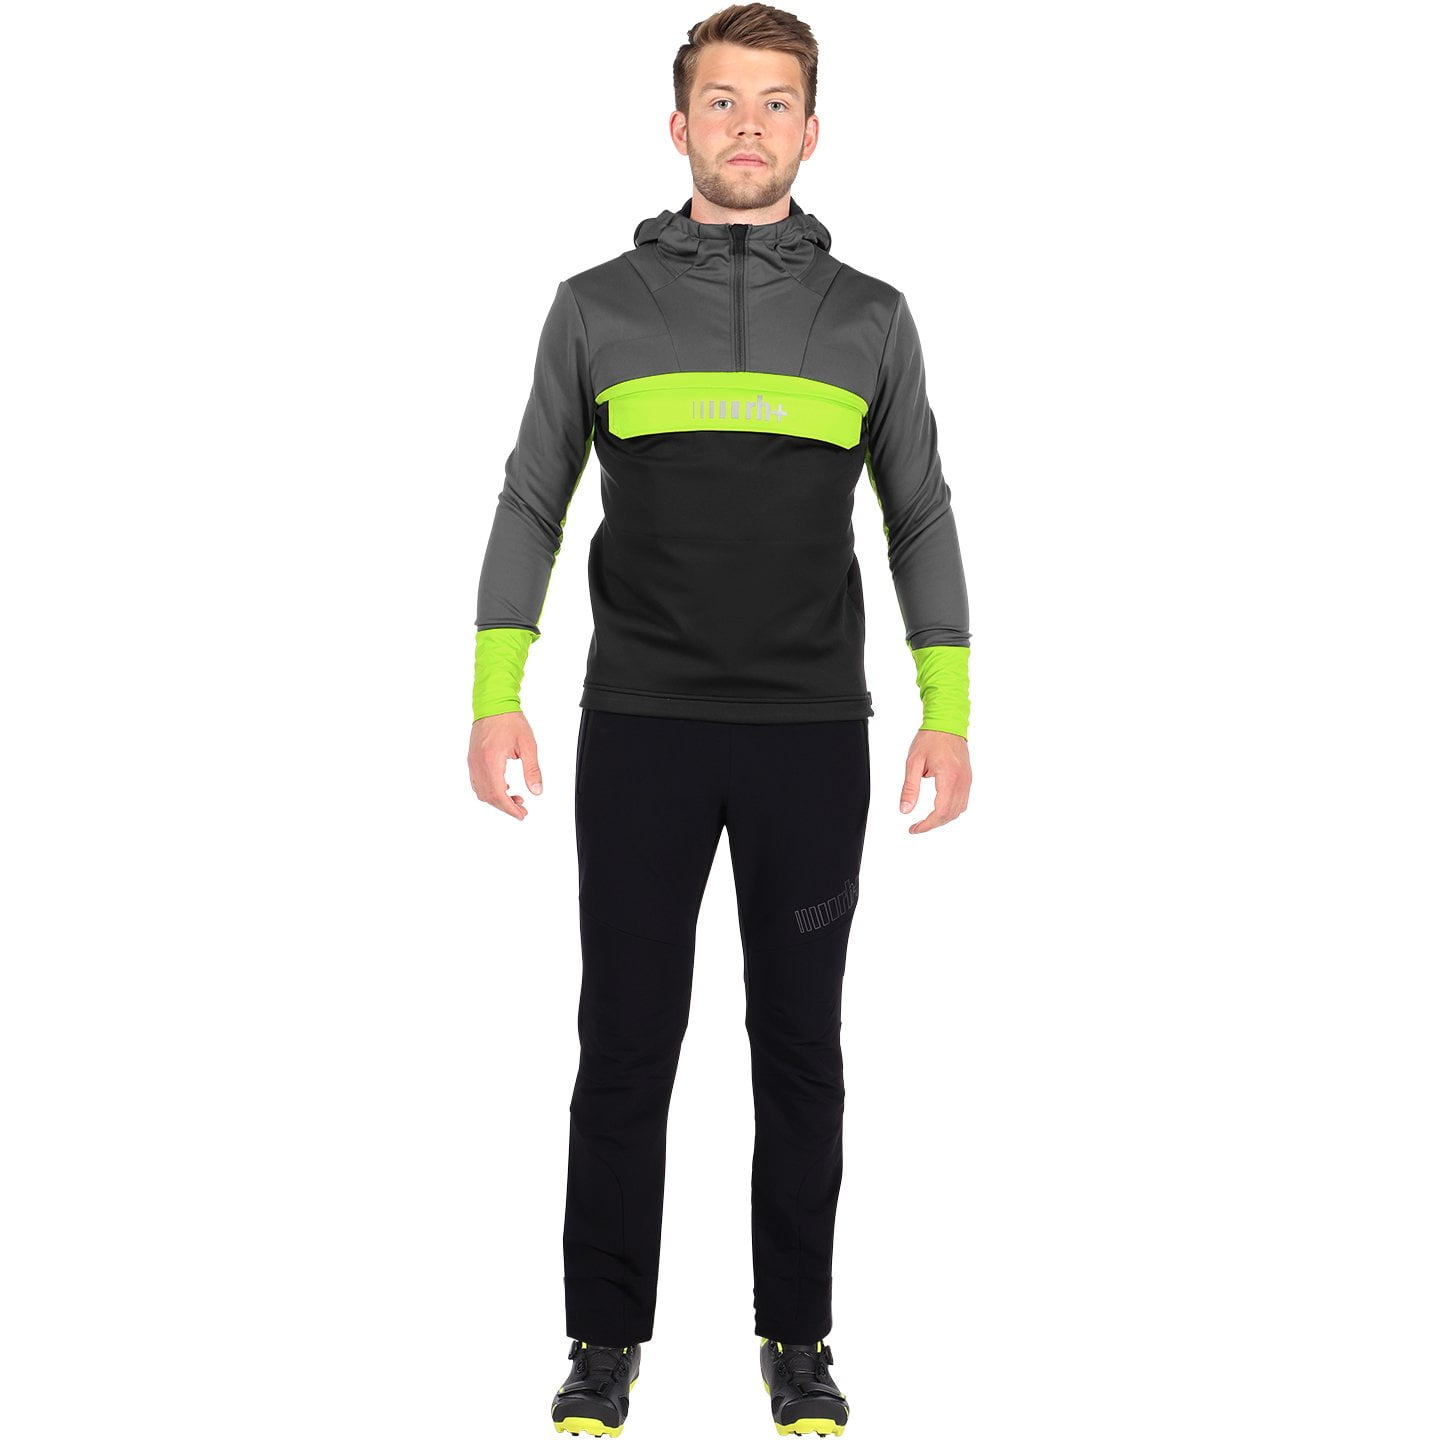 RH+ All Road Set (winter jacket + cycling tights) Set (2 pieces), for men